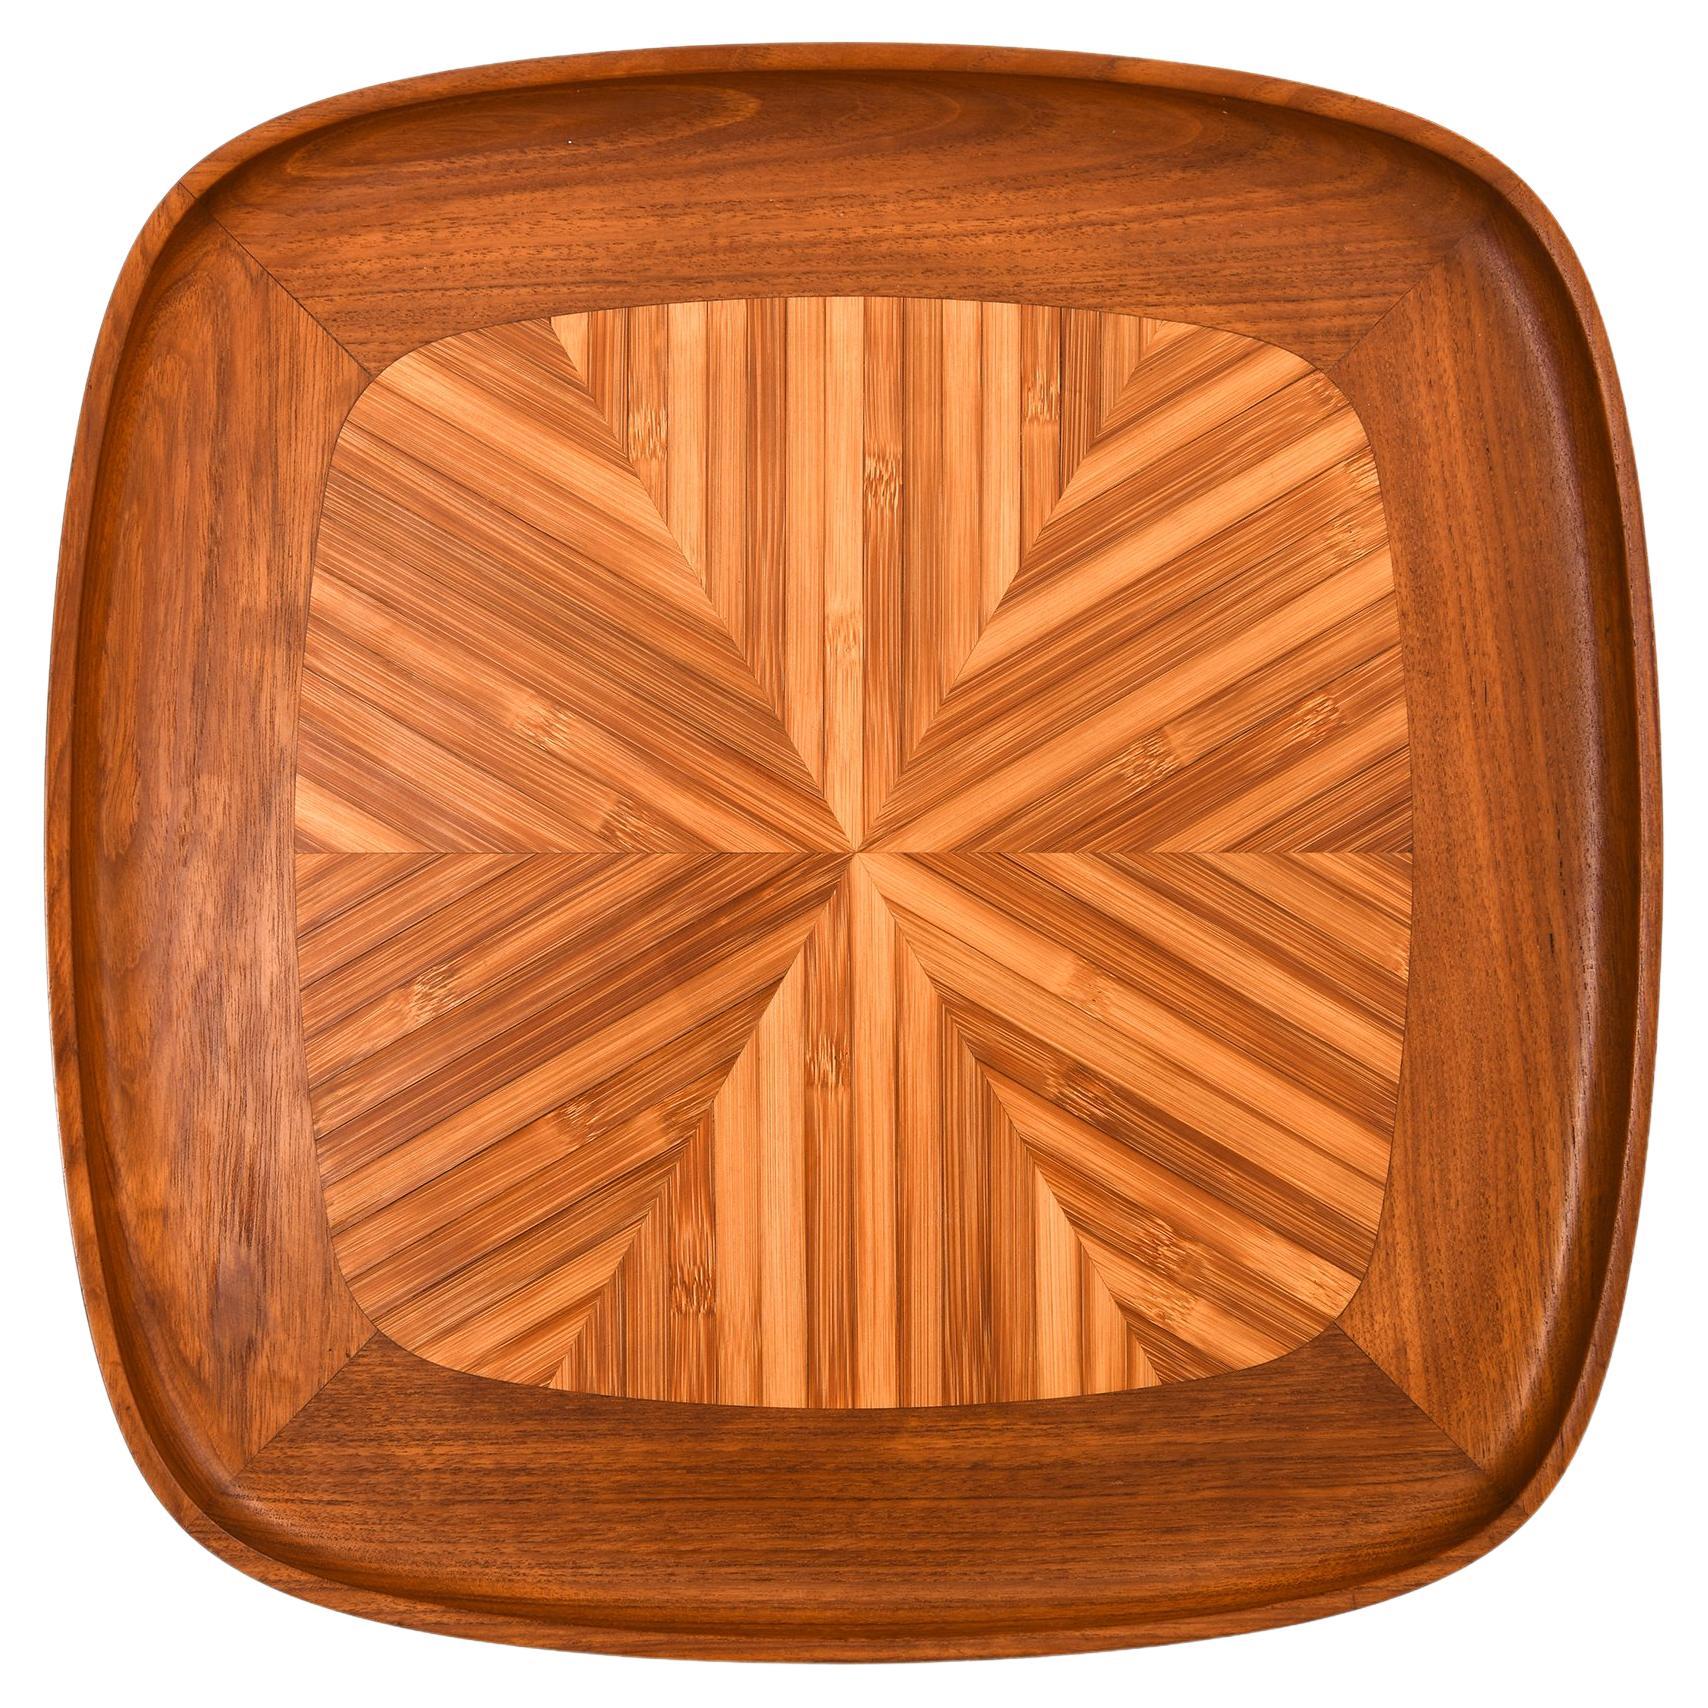 Serving Tray in Teak and Bamboo by Jens Quistgaard, 1950's For Sale